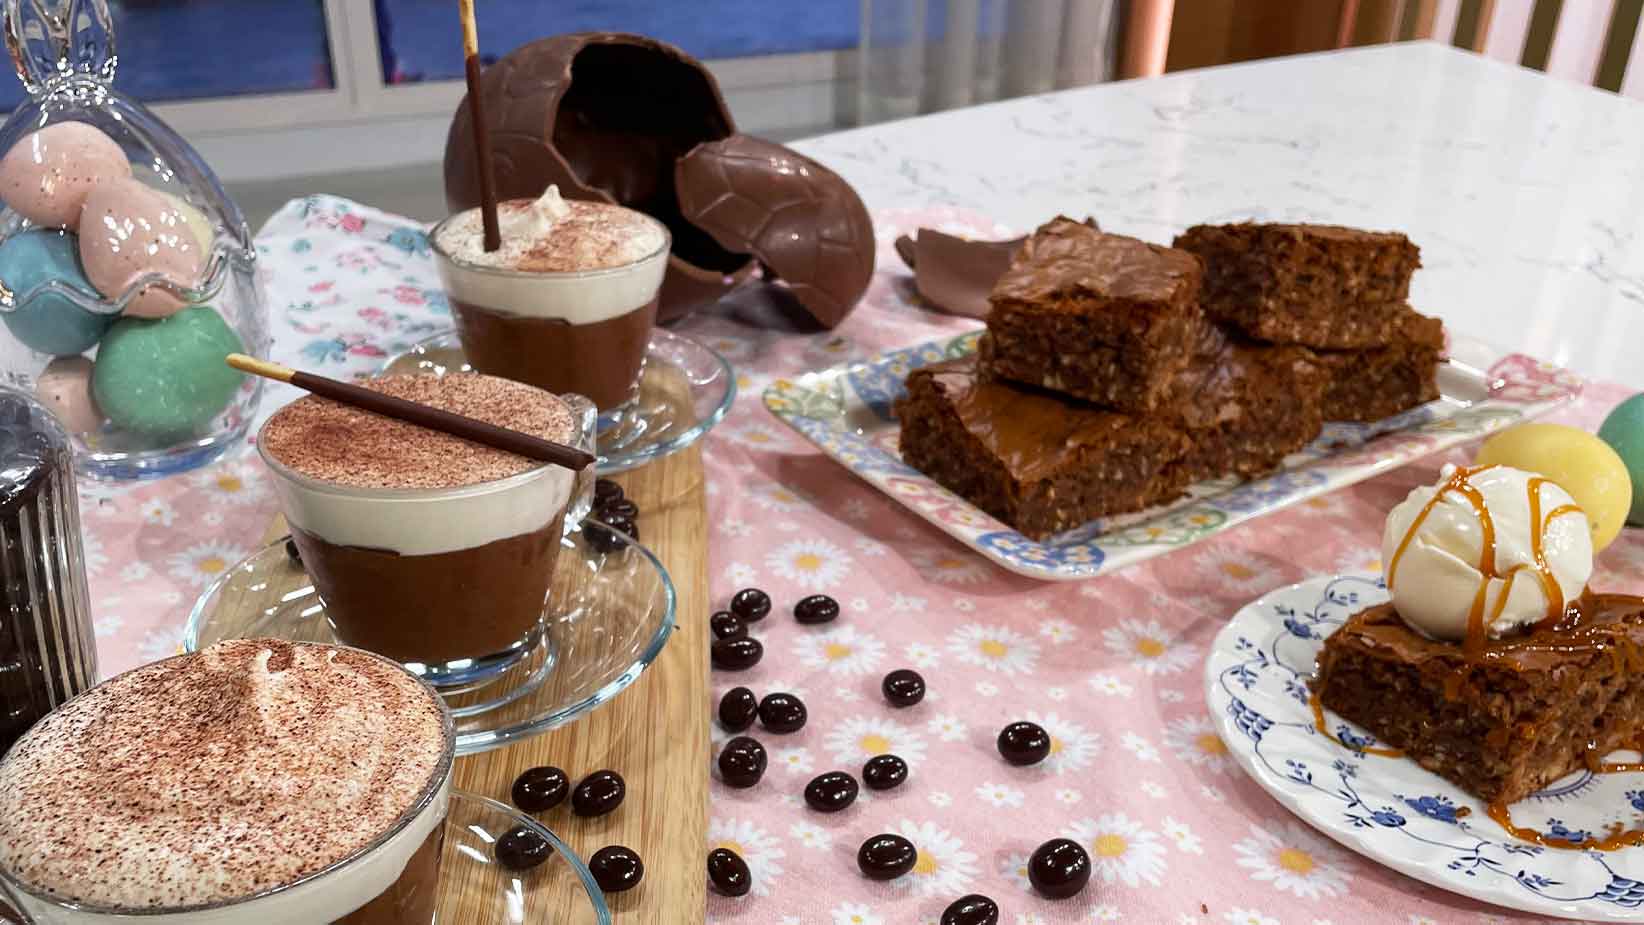 Phil Vickery's gooey chocolate brownies and decadent chocolate mousse